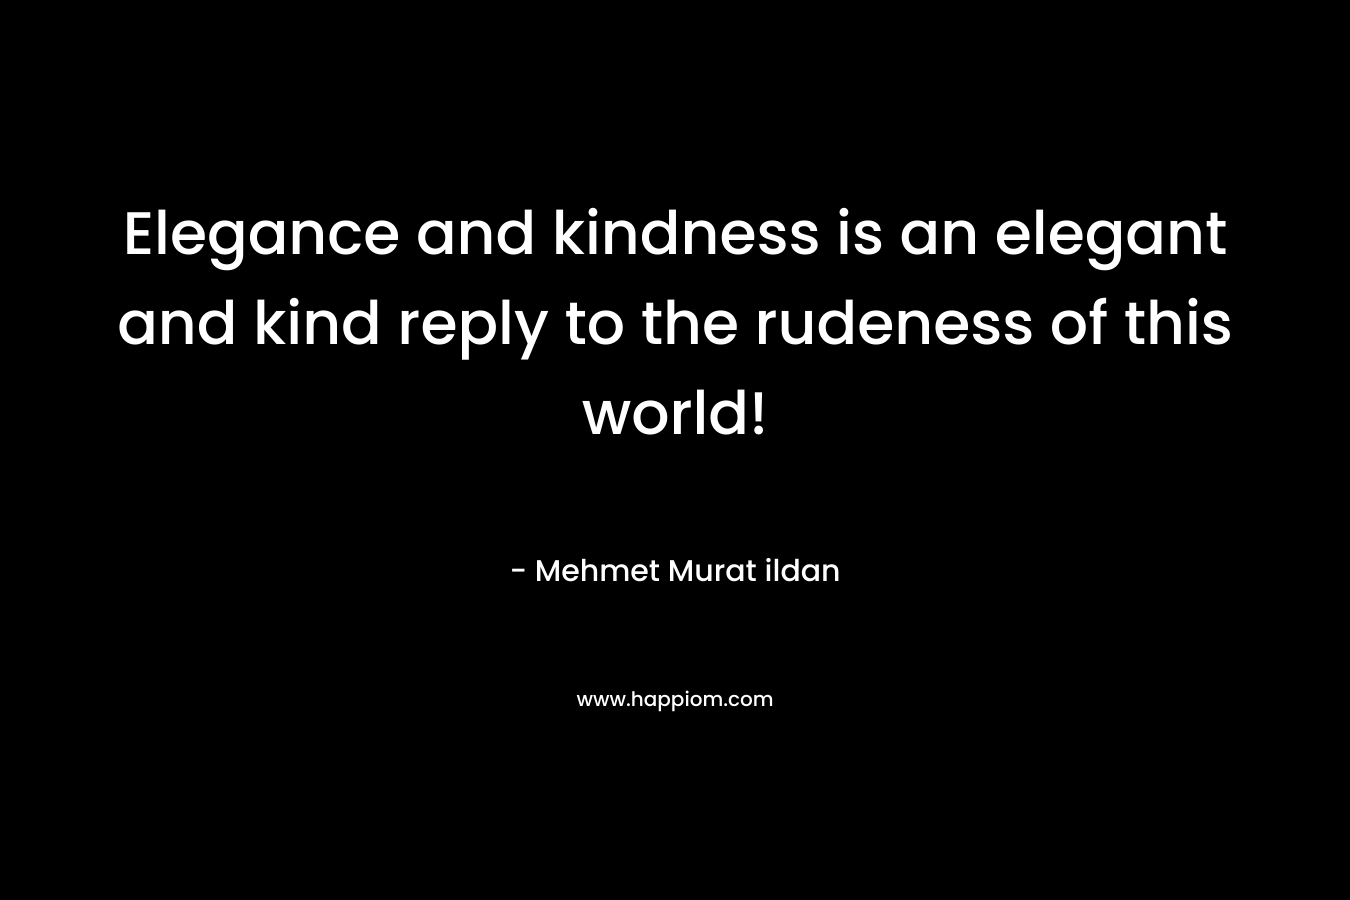 Elegance and kindness is an elegant and kind reply to the rudeness of this world! – Mehmet Murat ildan